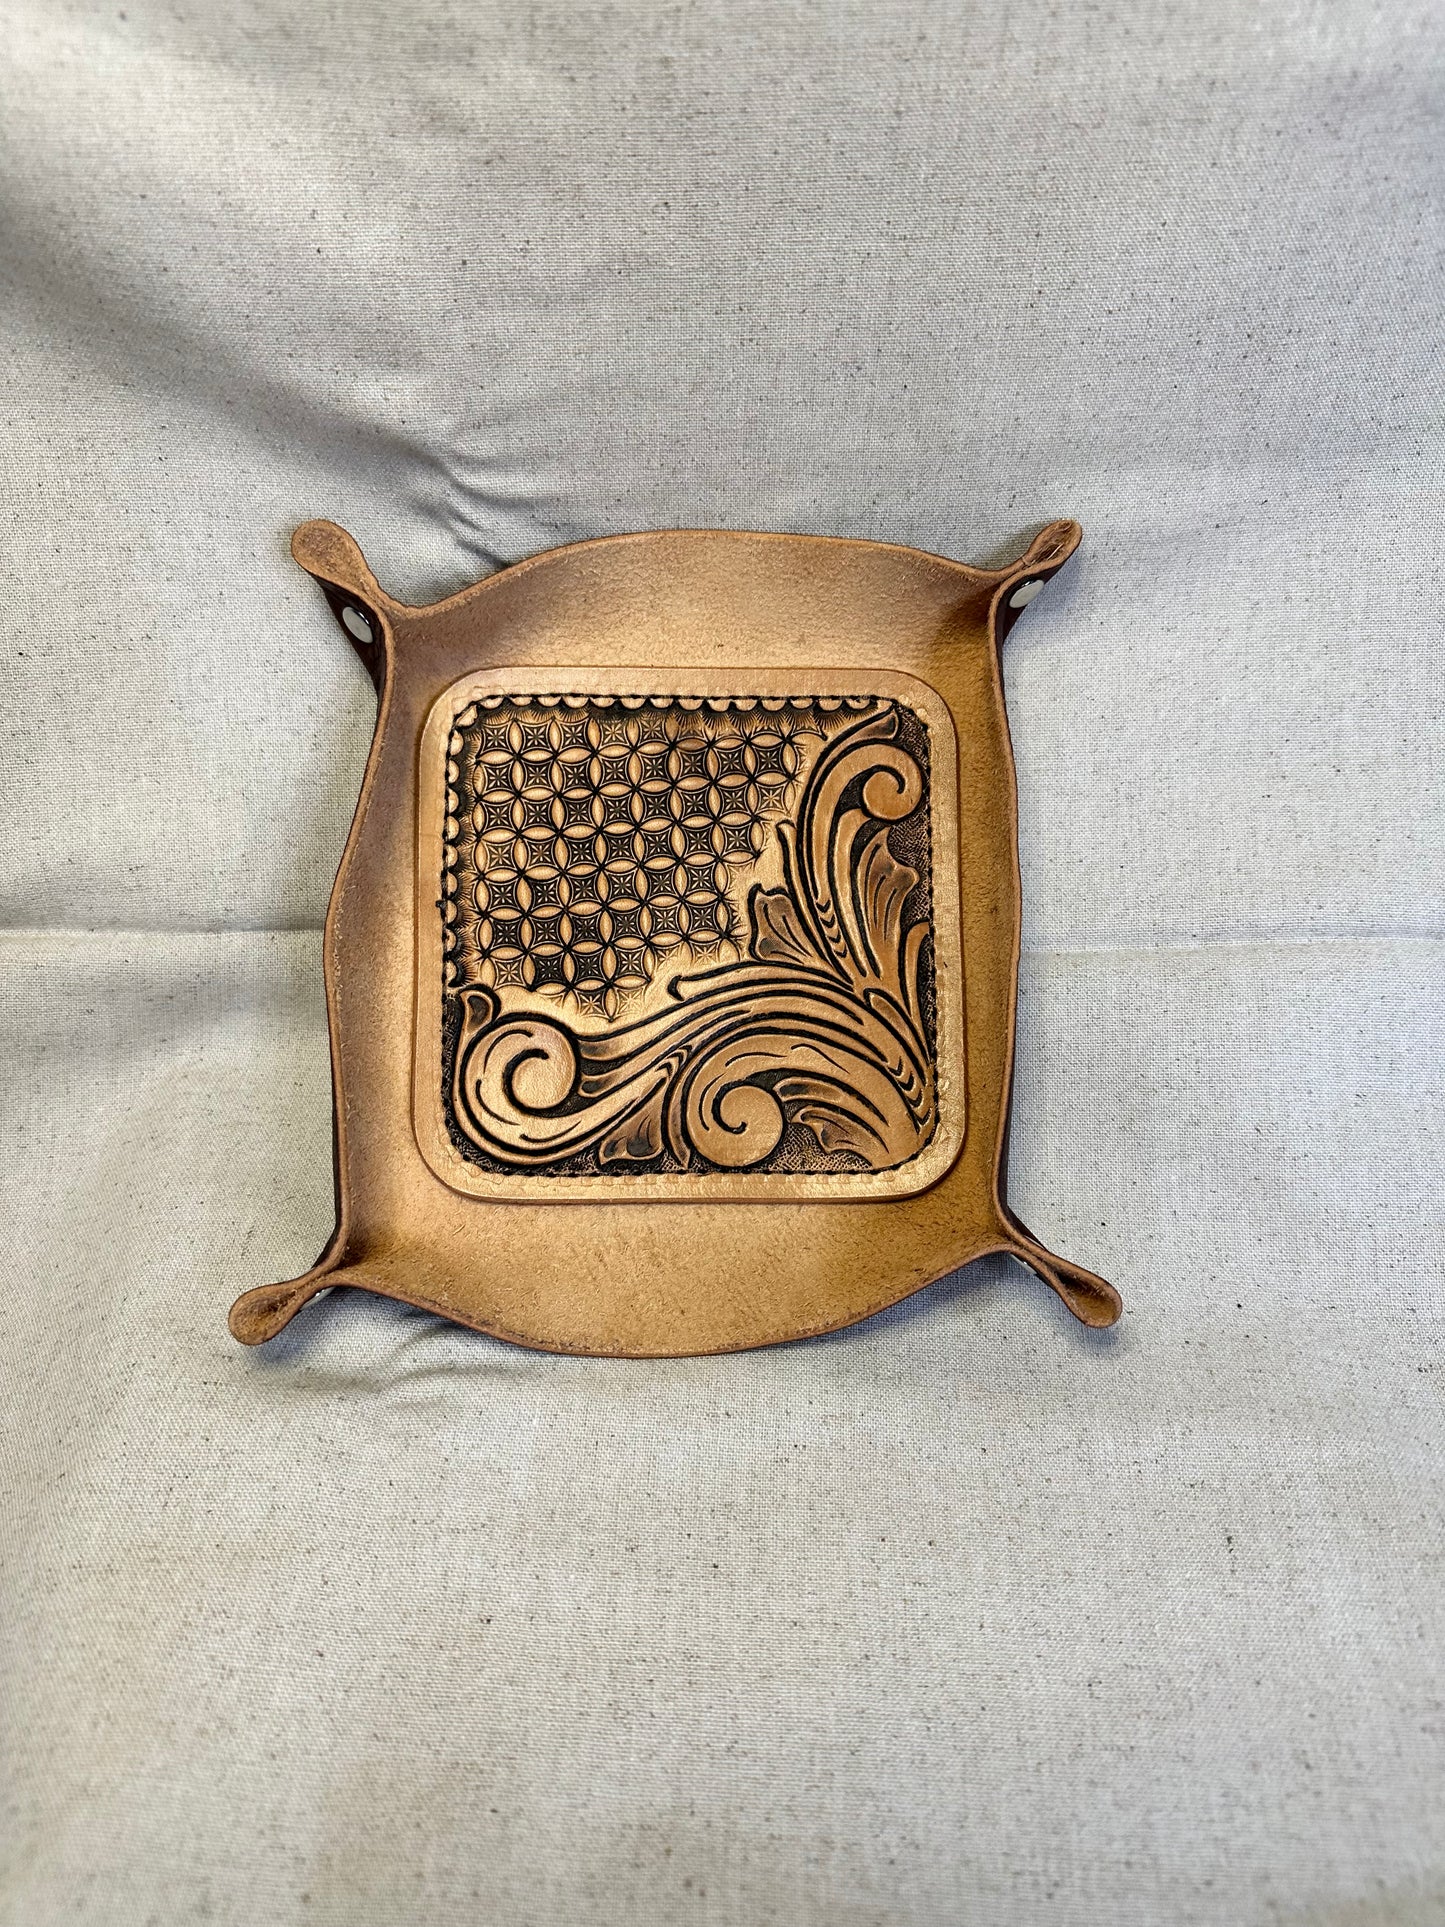 Valet Tray - Floral Tooled & Geometric / Lighter Brown Leather